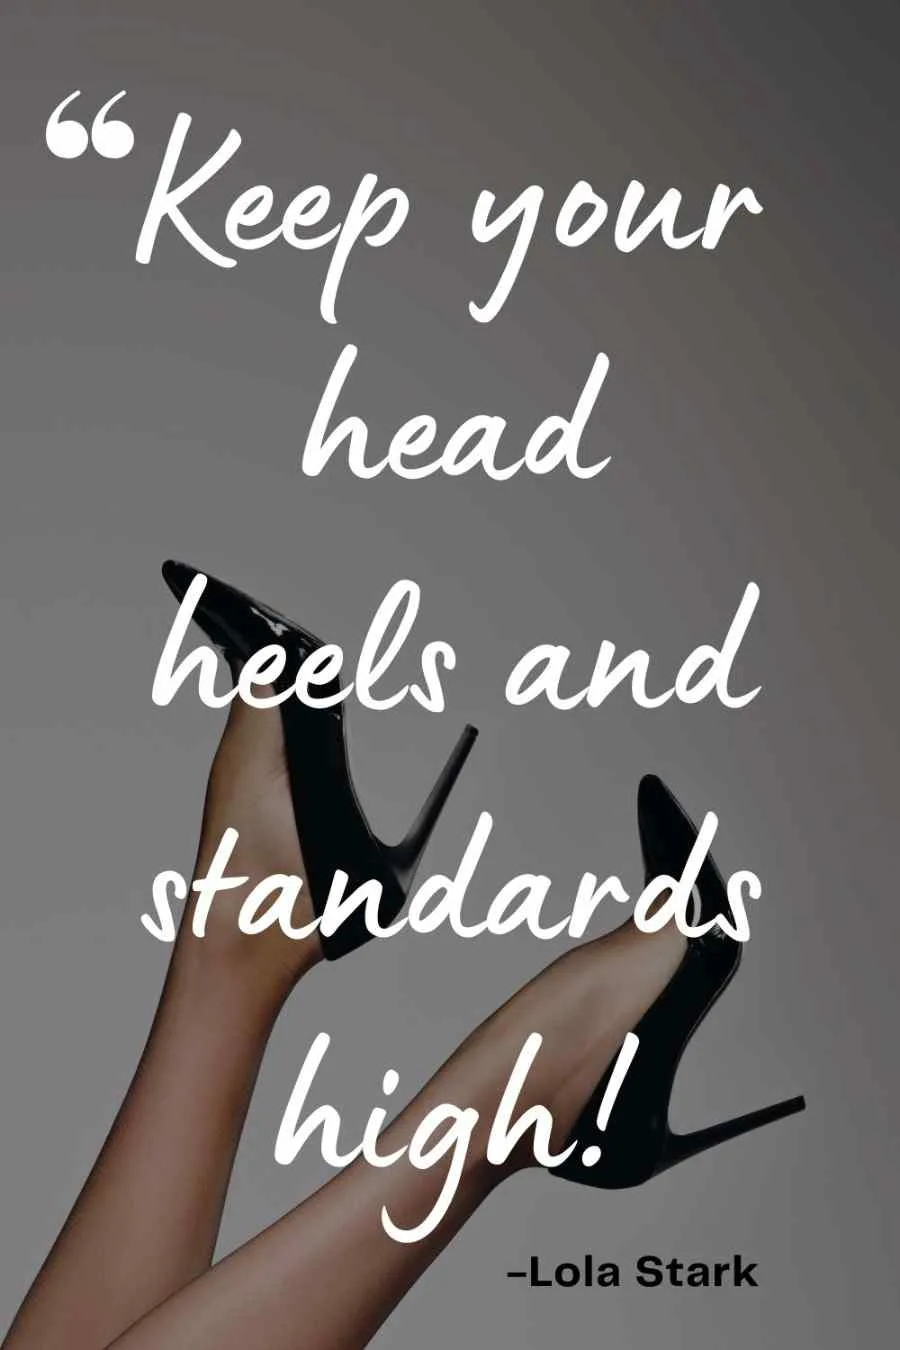 Keep your head heels and standards high heels quotes by Lola Stark.jpg